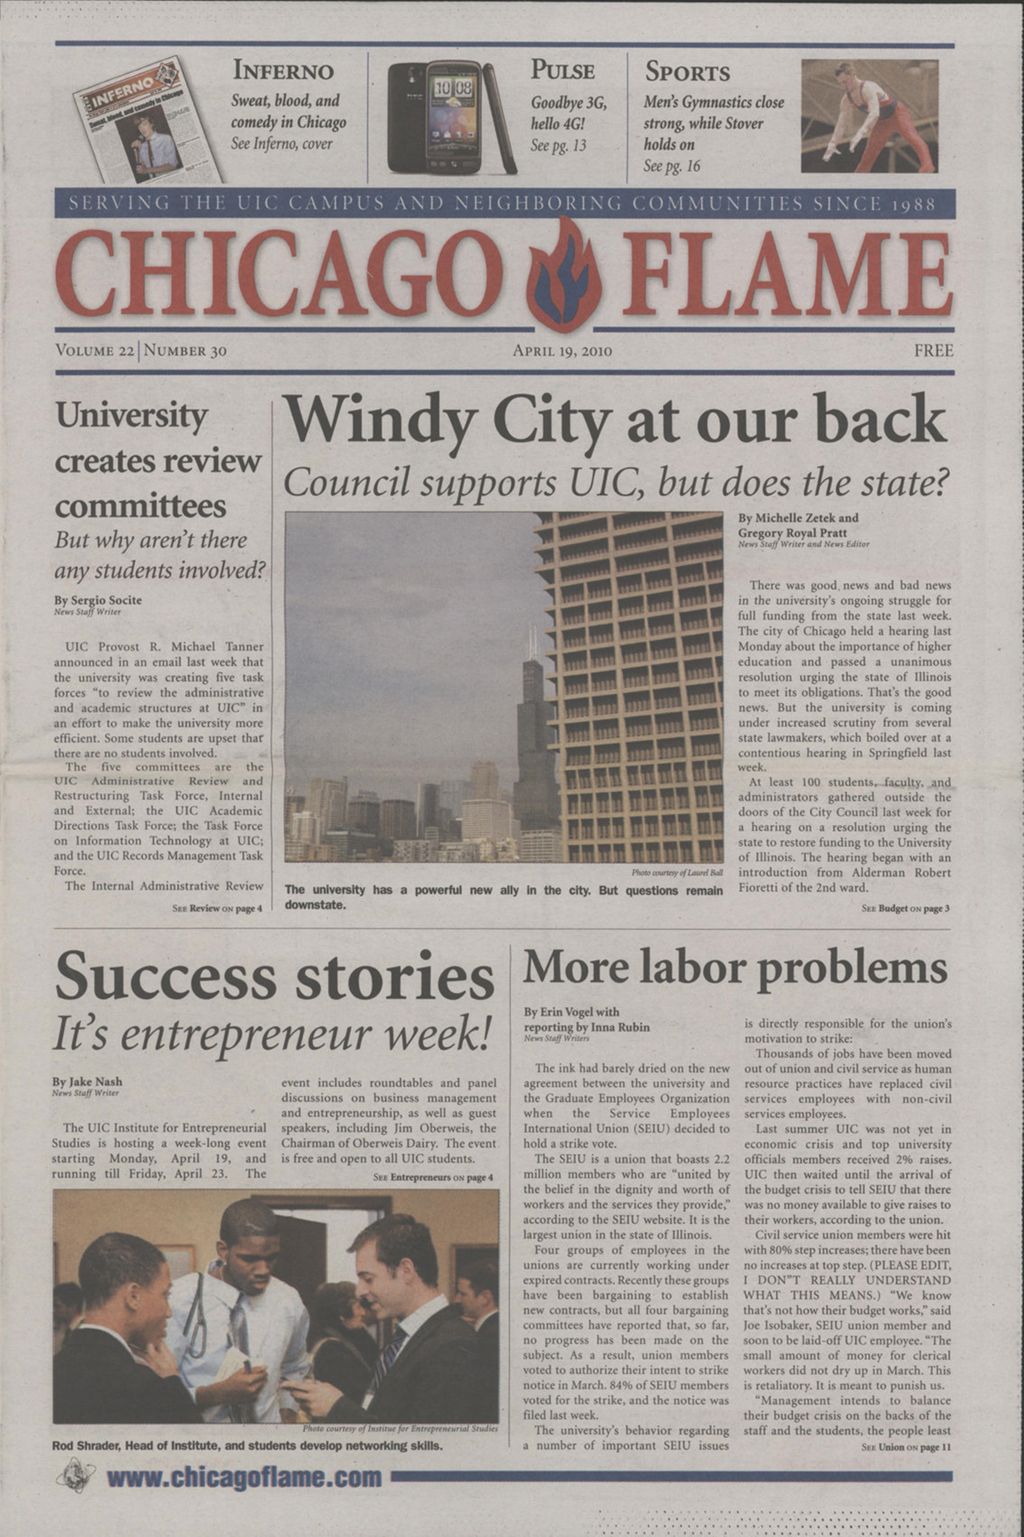 Chicago Flame (April 19, 2010)